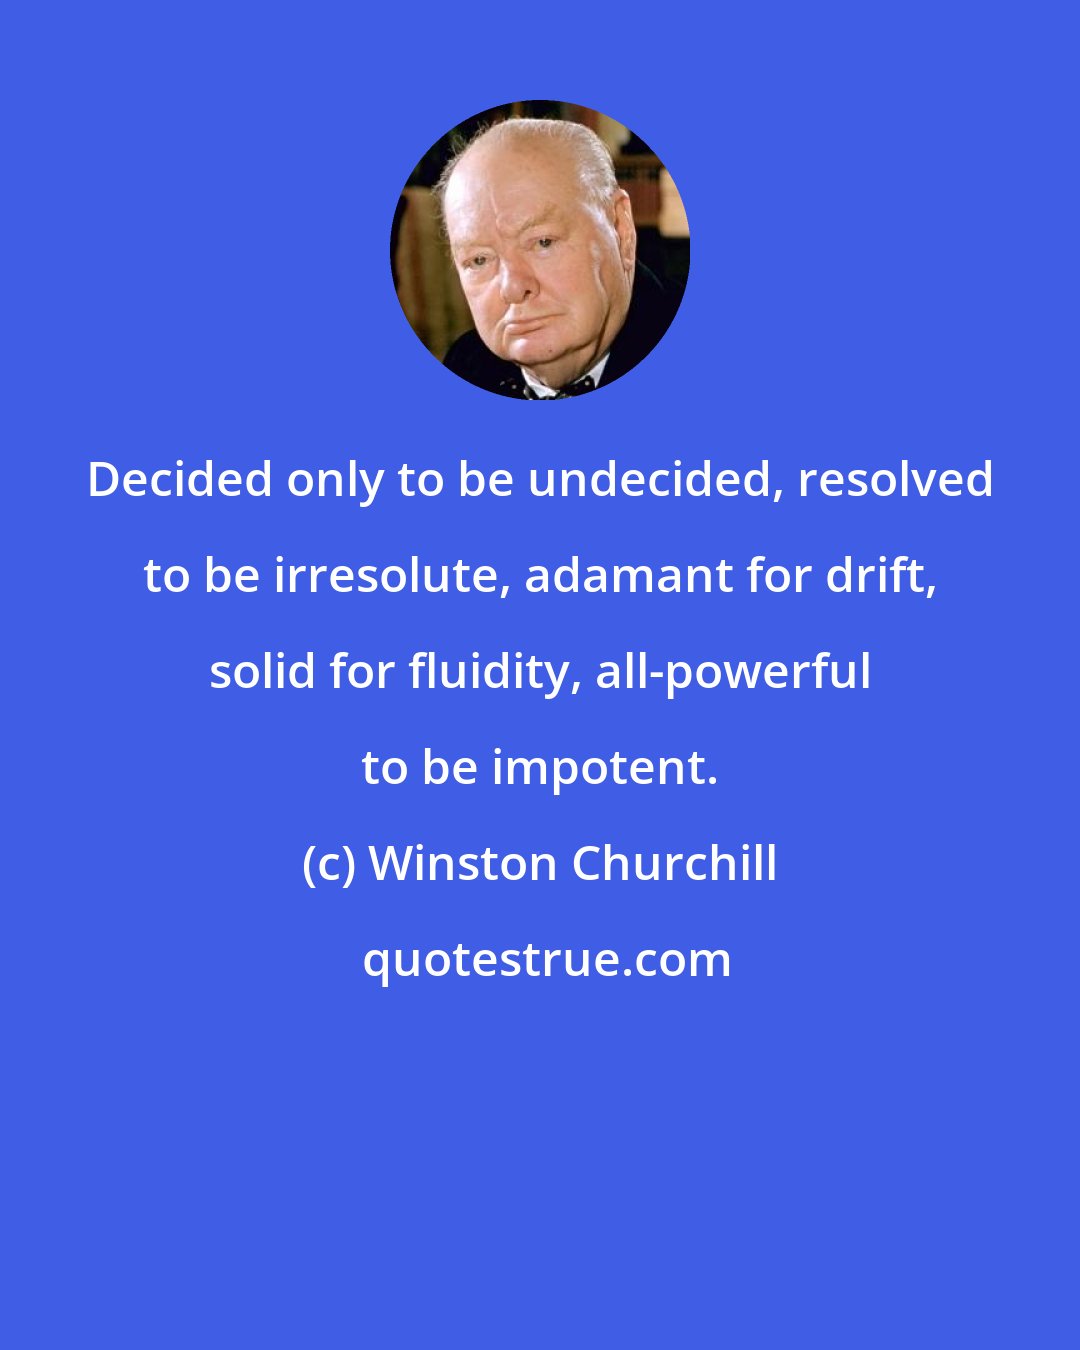 Winston Churchill: Decided only to be undecided, resolved to be irresolute, adamant for drift, solid for fluidity, all-powerful to be impotent.